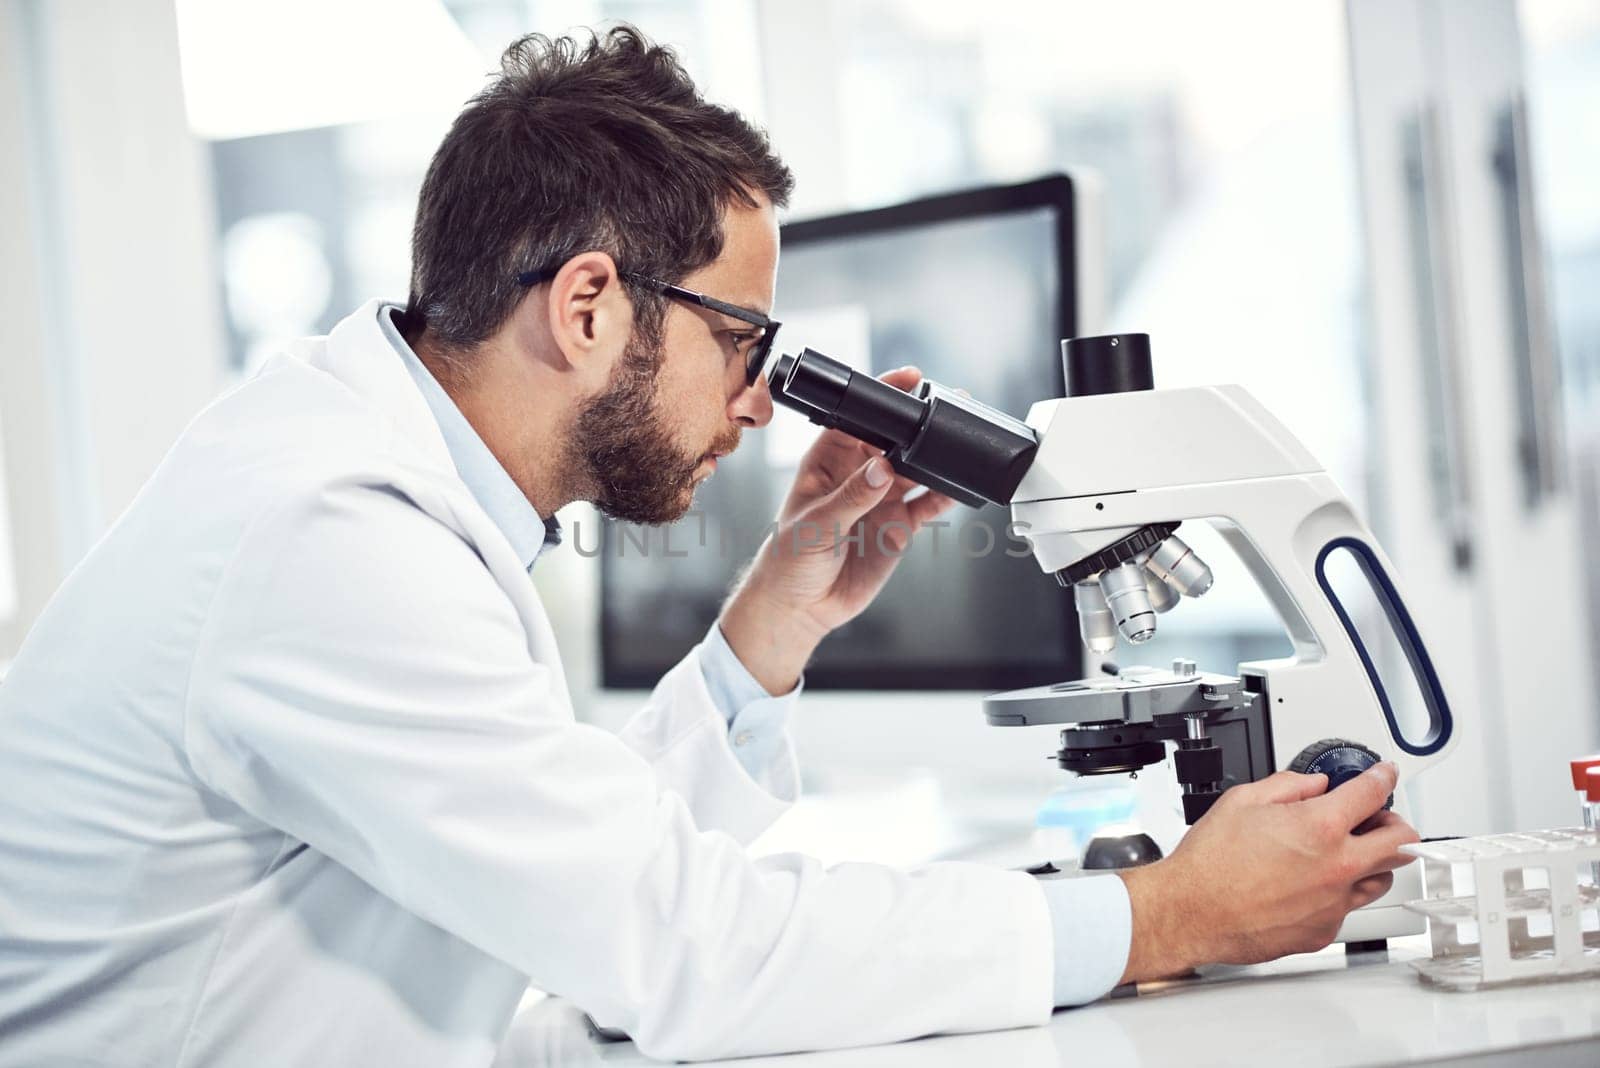 This part requires a lot of focus. a focused young male scientist looking through a microscope while being seated inside of a laboratory